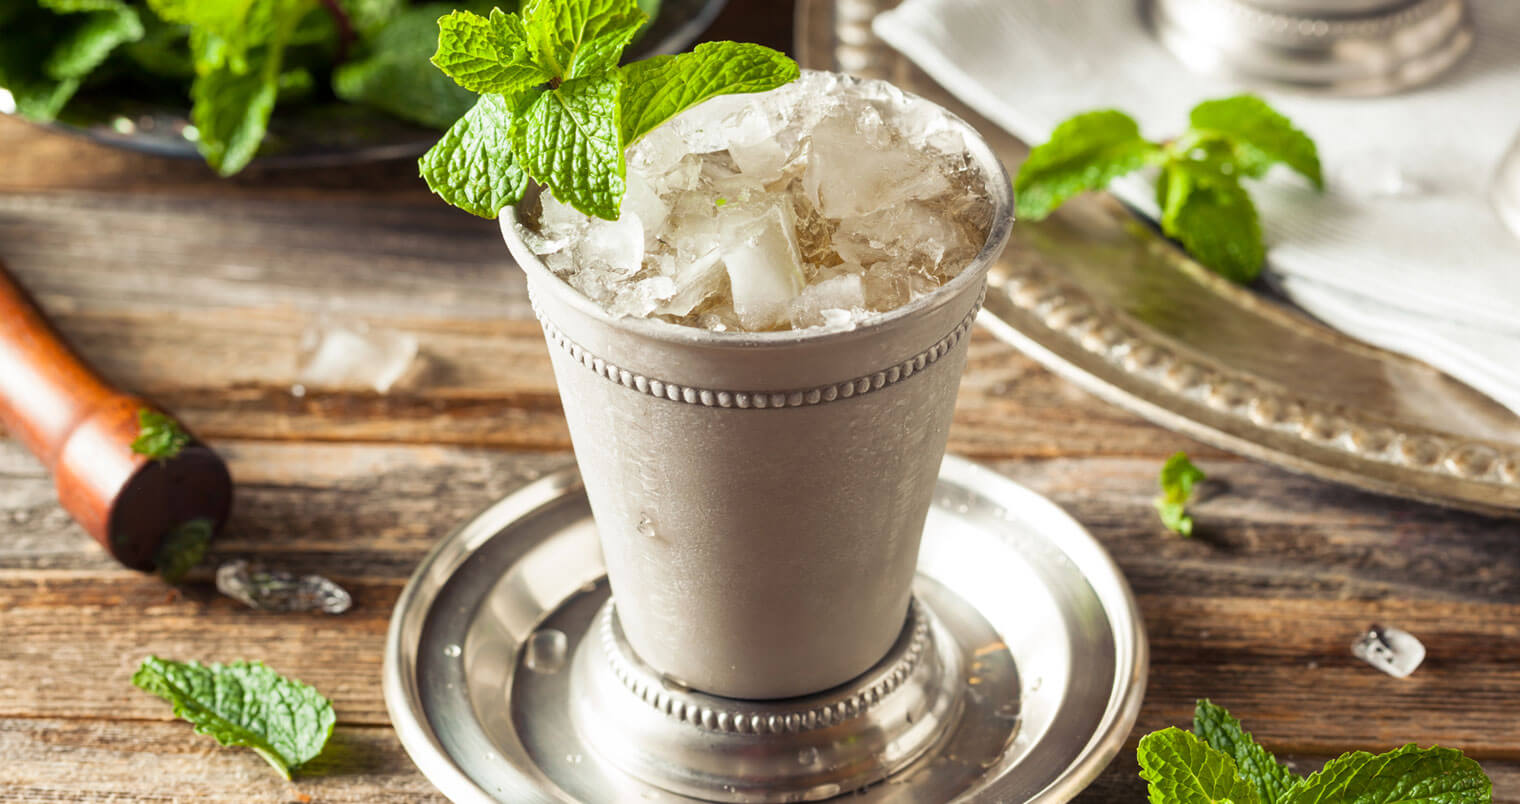 The Perfect Mint Julep, elegant cocktail with garnish, featured image